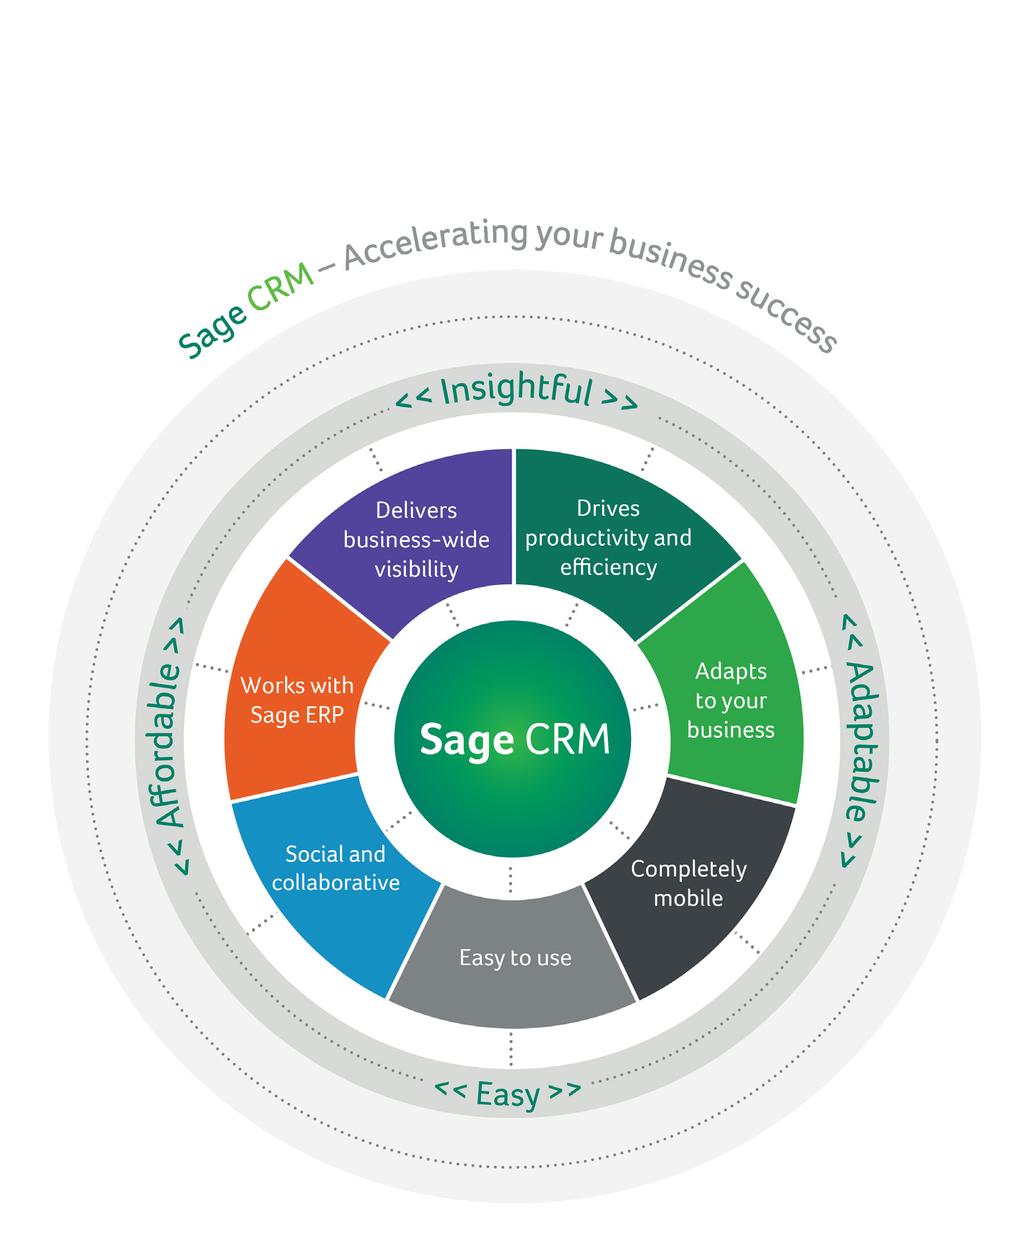 Welcome to Sage CRM Sage CRM is an affordable, adaptable and easy to use CRM solution designed with the needs of small and medium sized companies at its core.